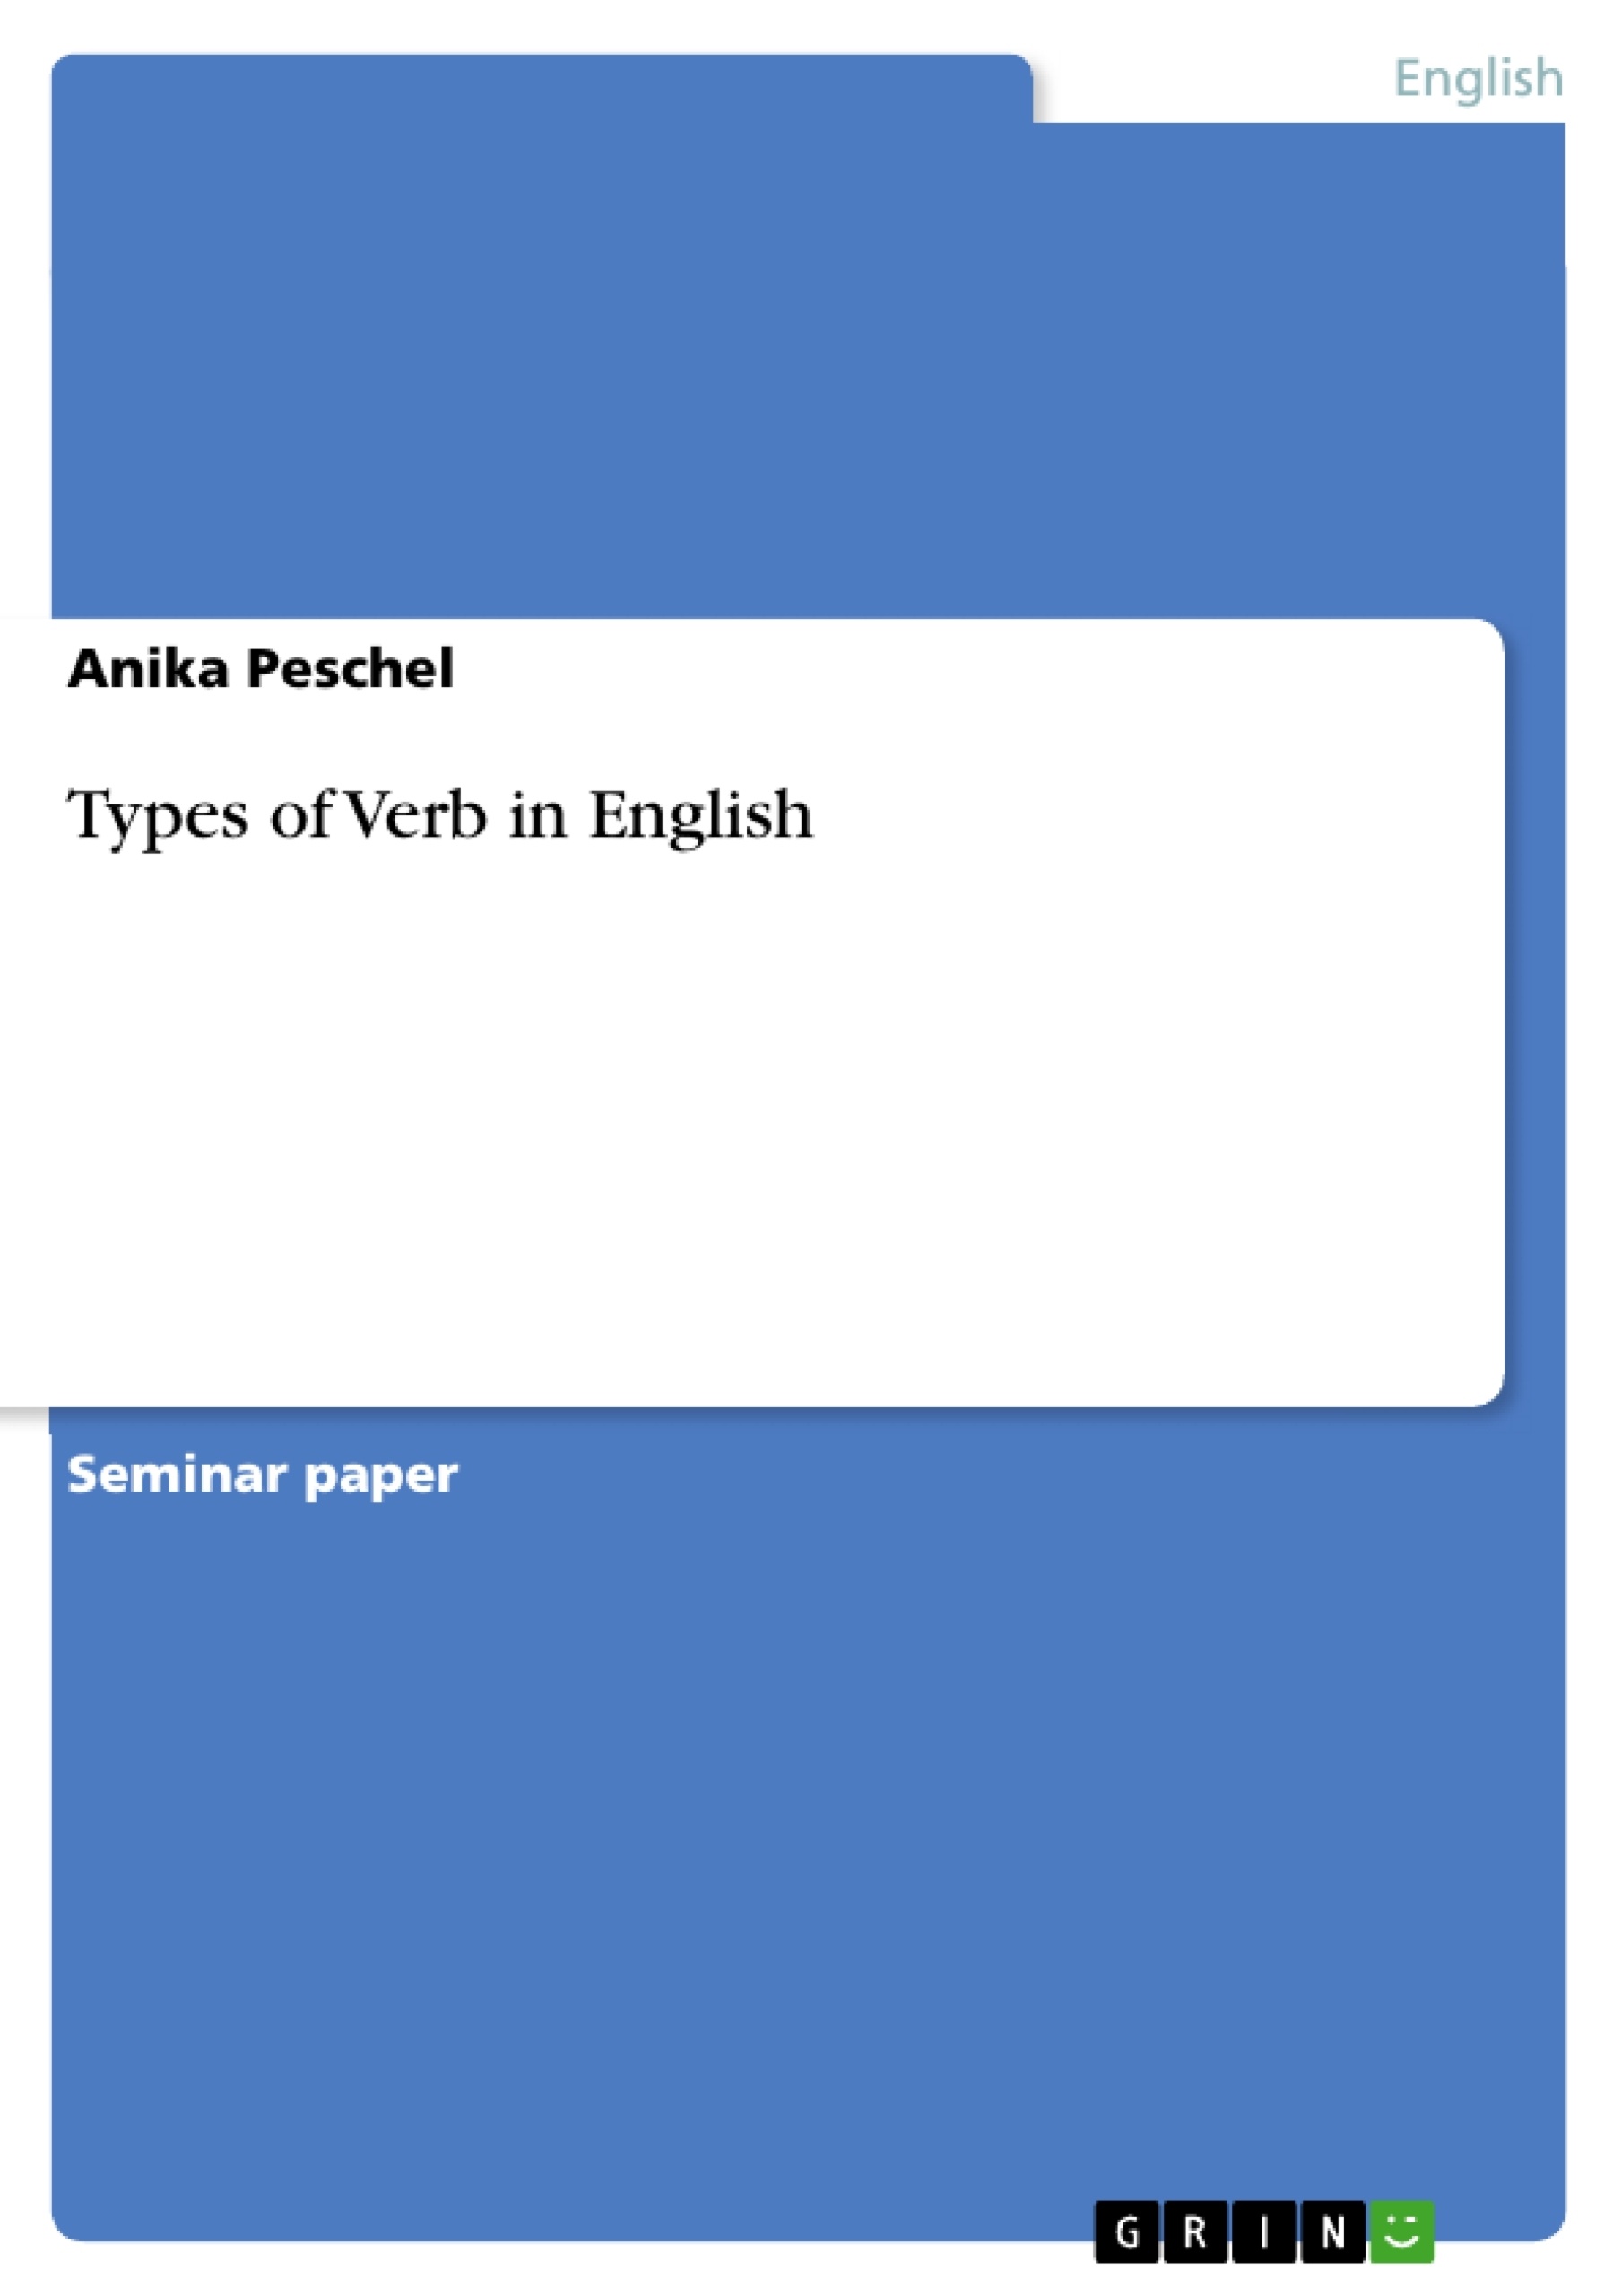 Buy research papers online cheap transitive and intransiitive verbs